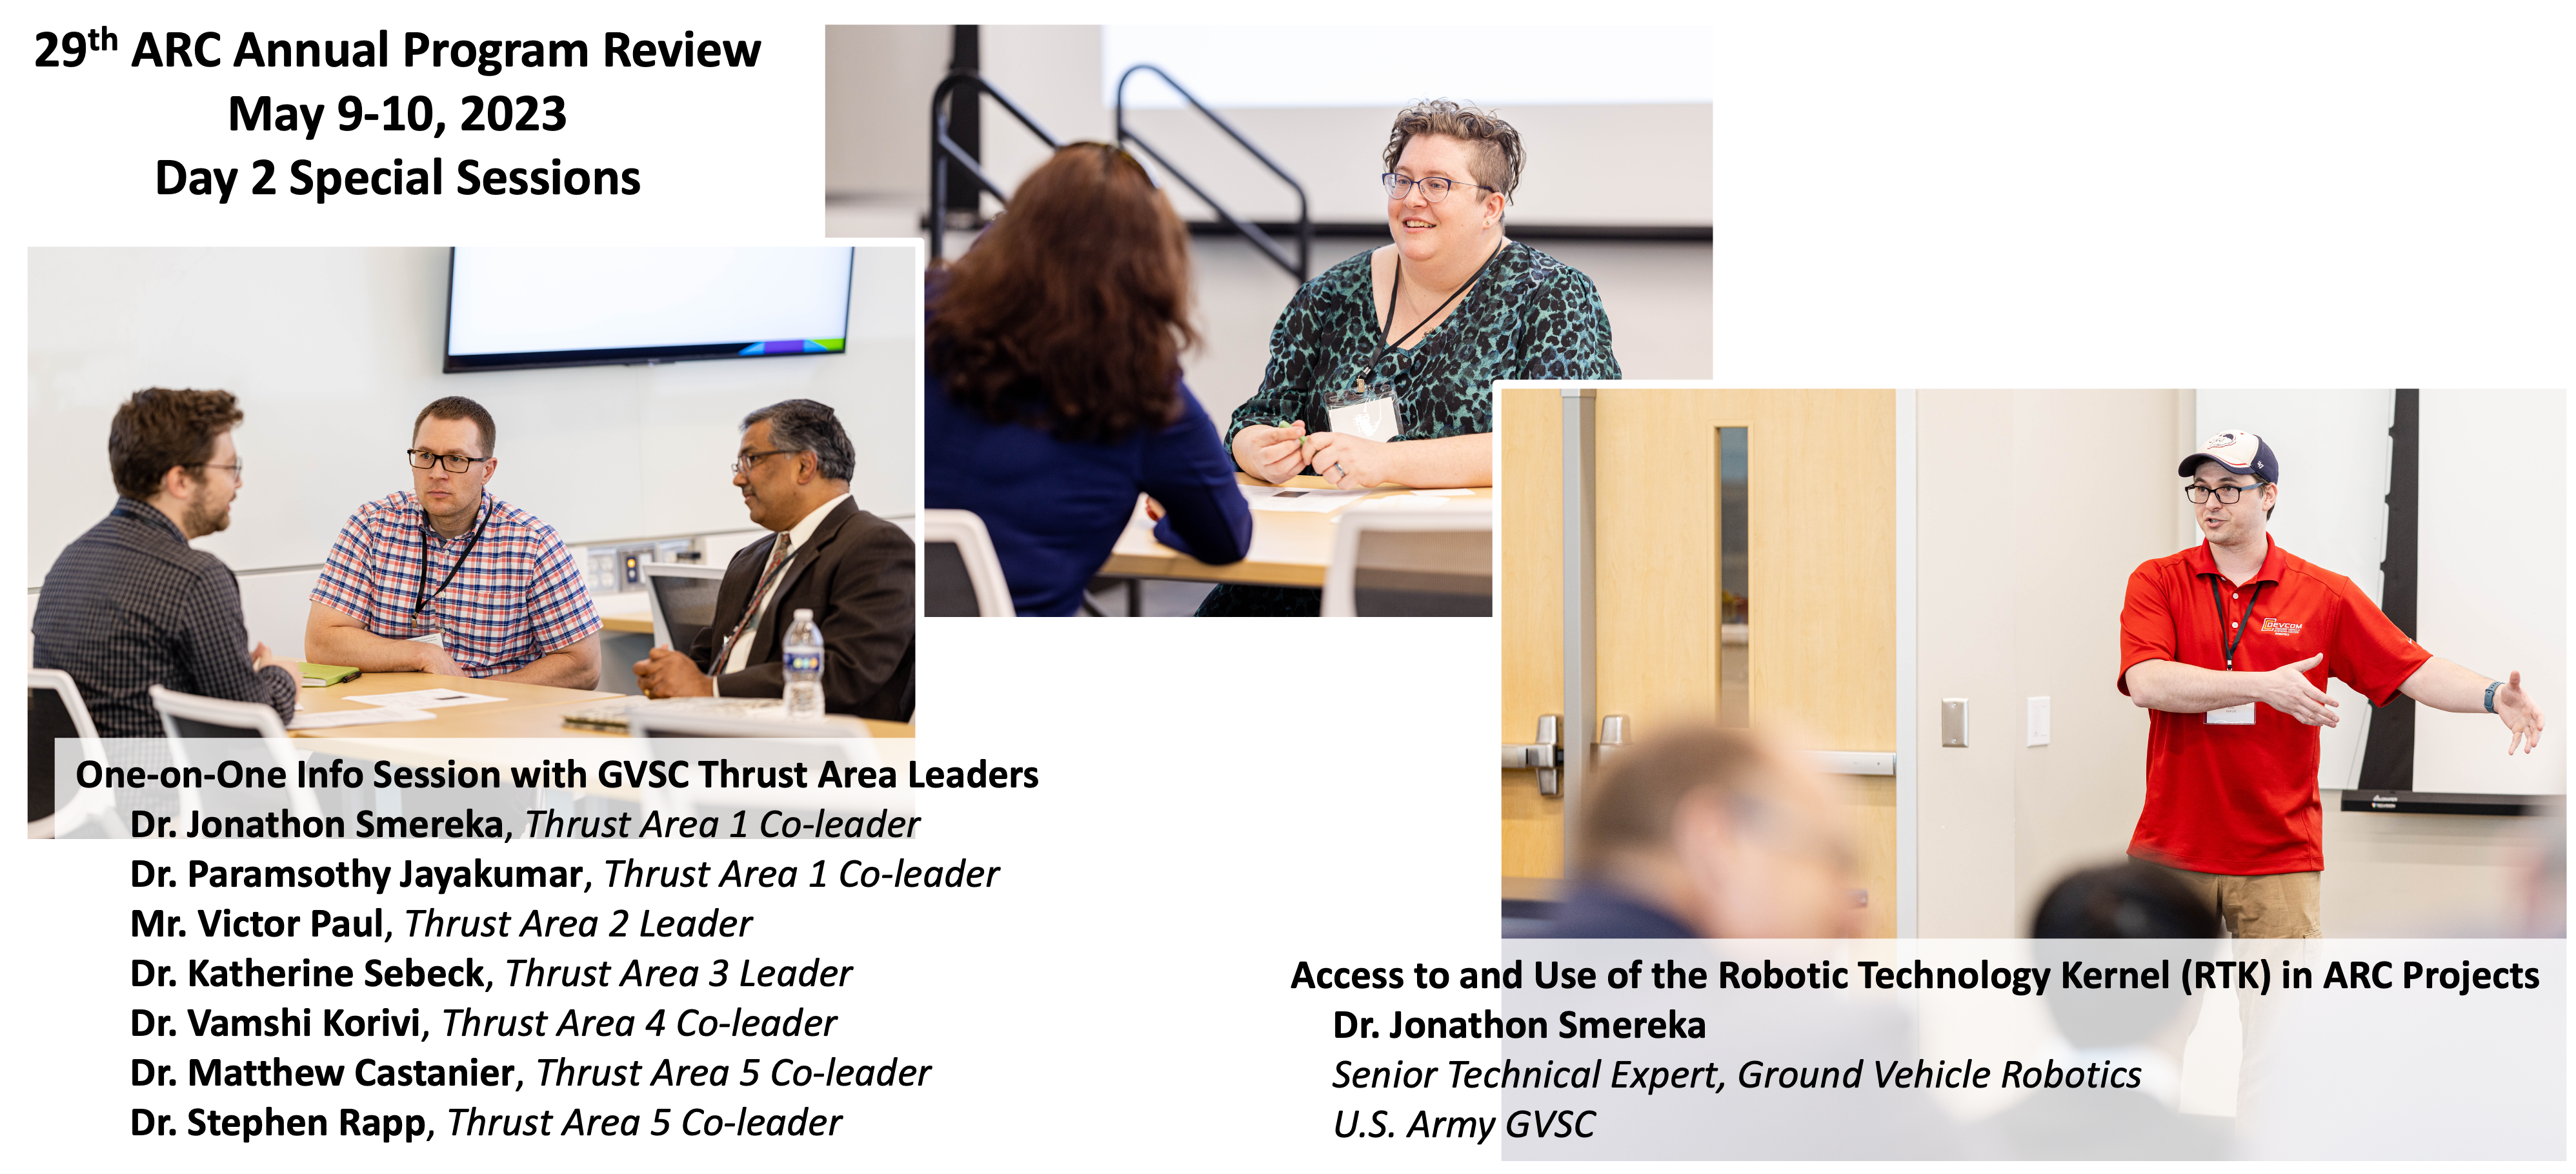 Special sessions at 2023 annual review: one-on-one chats with ARC thrust area leaders, and an info session on Access to and Use of the Robotic Technology Kernel (RTK) in ARC Projects